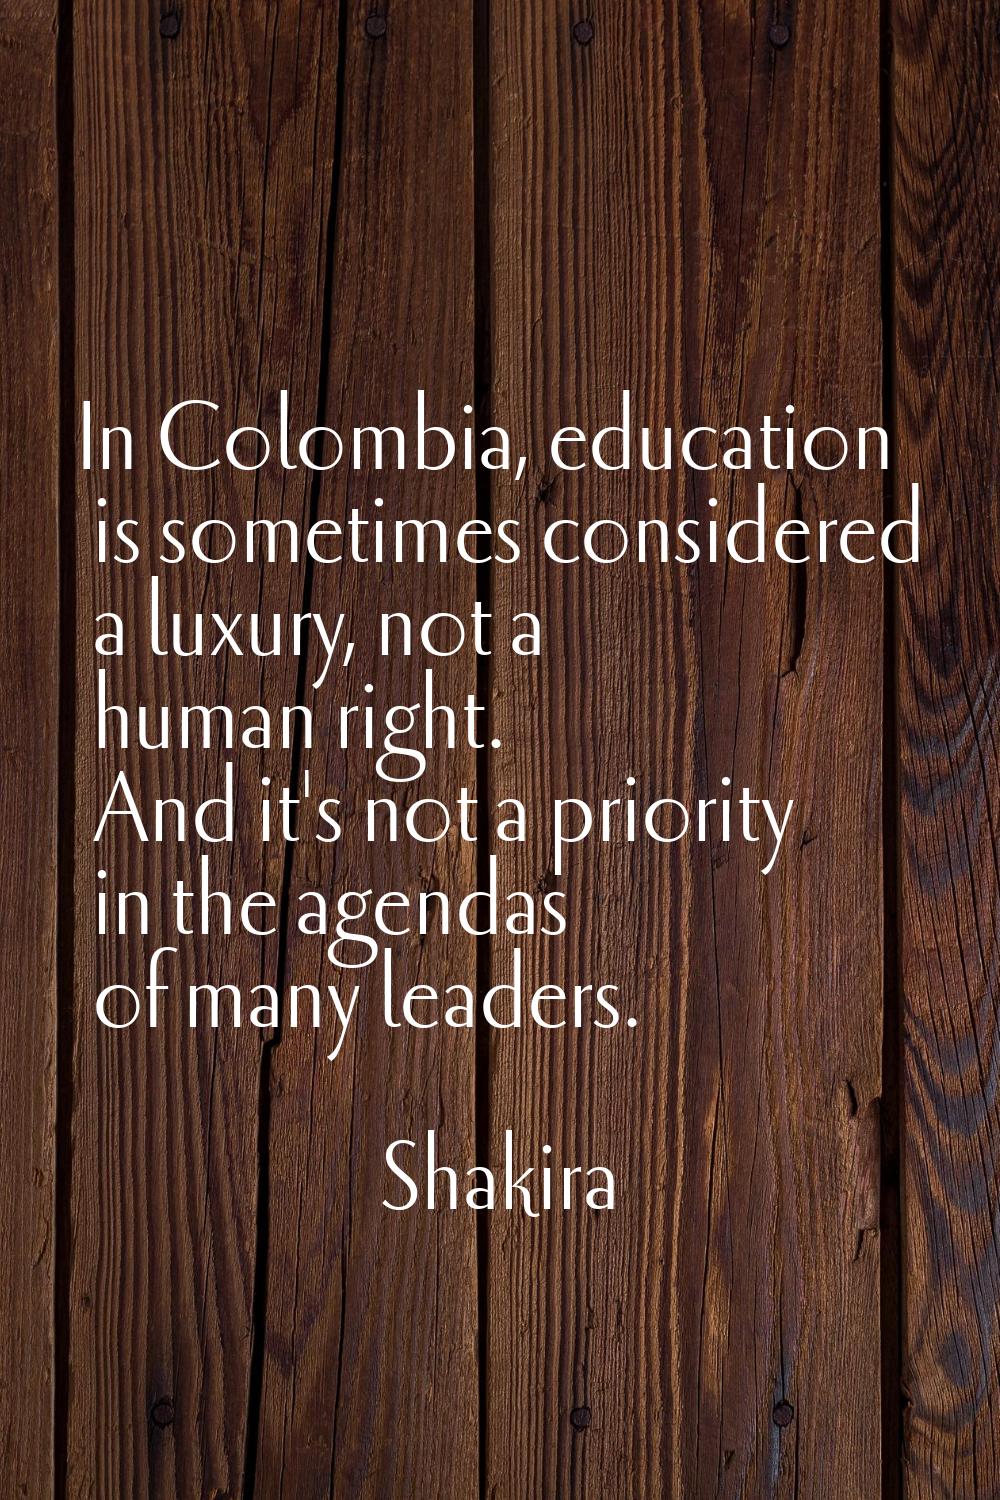 In Colombia, education is sometimes considered a luxury, not a human right. And it's not a priority